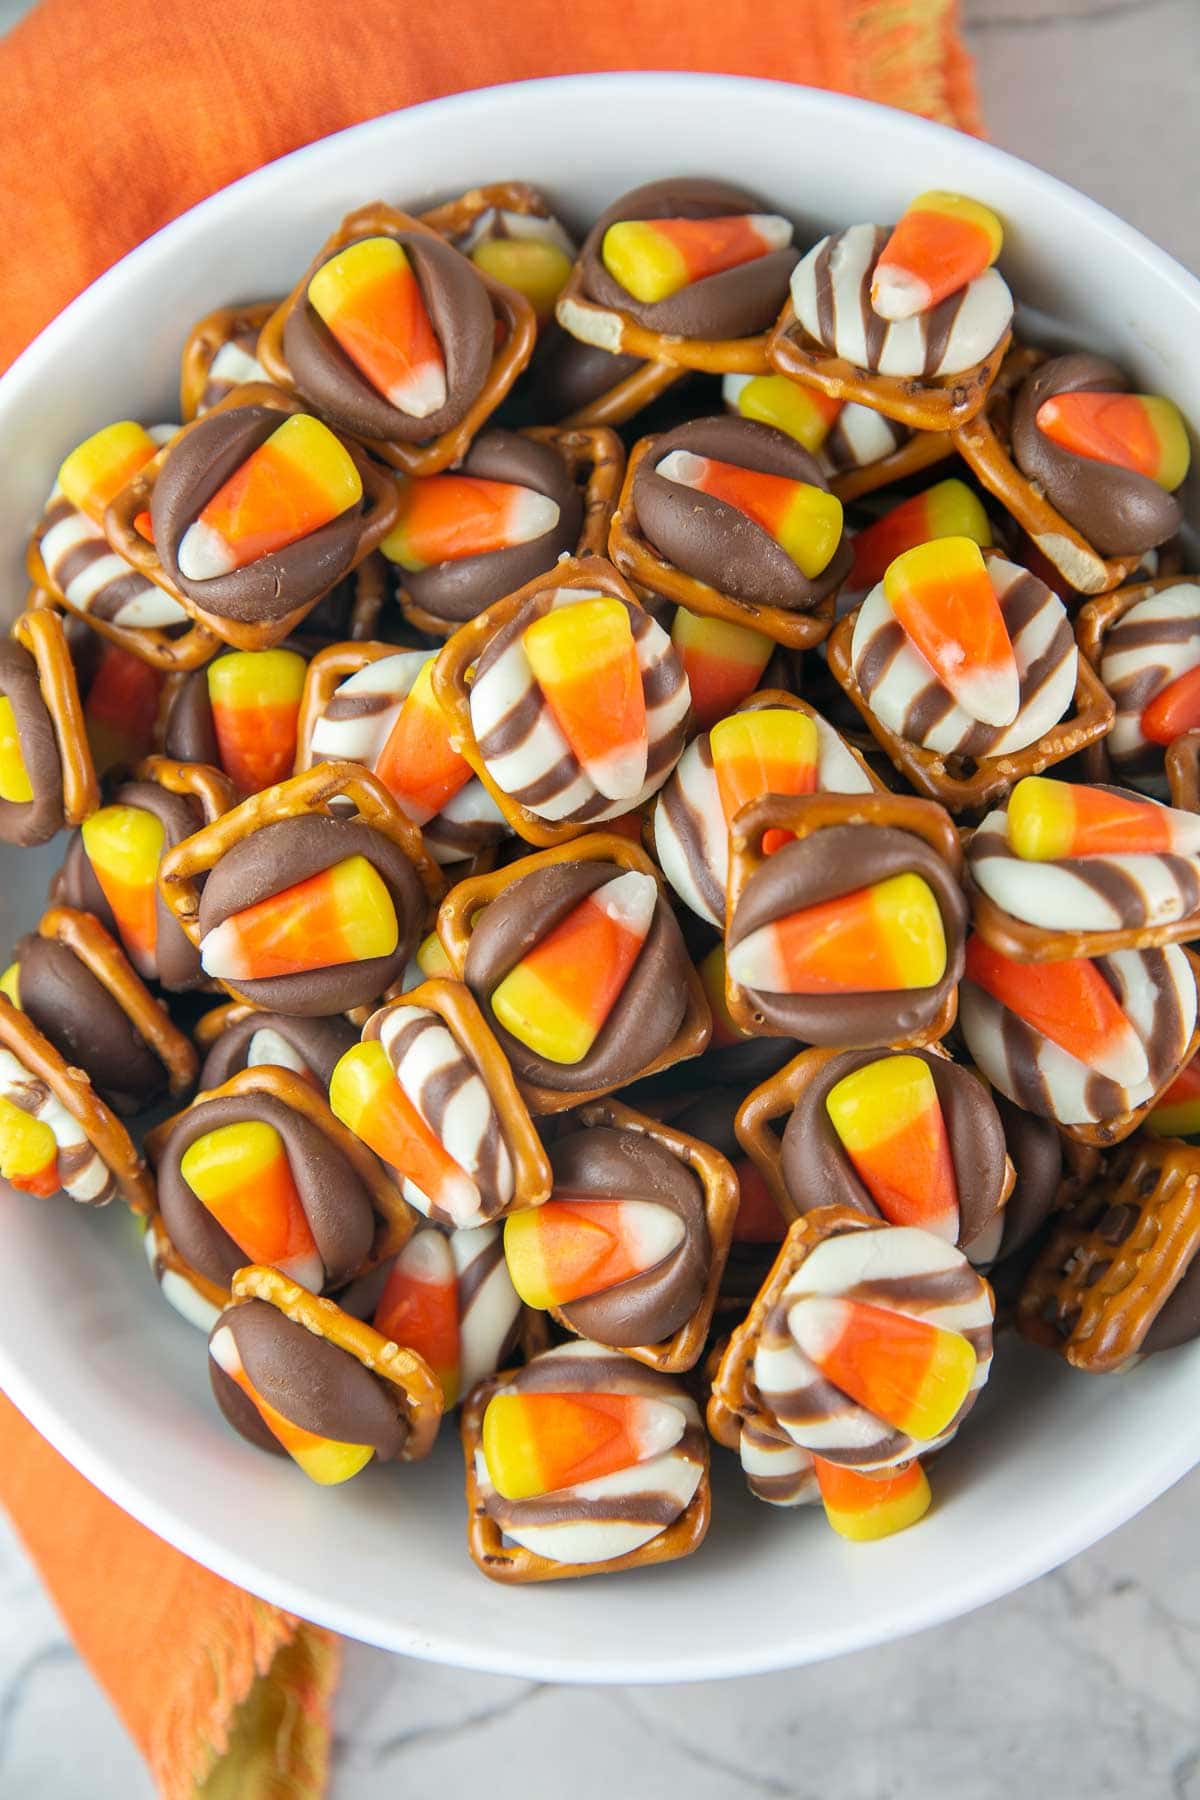 large bowl filled with pretzels covered with a kiss and a piece of candy corn.